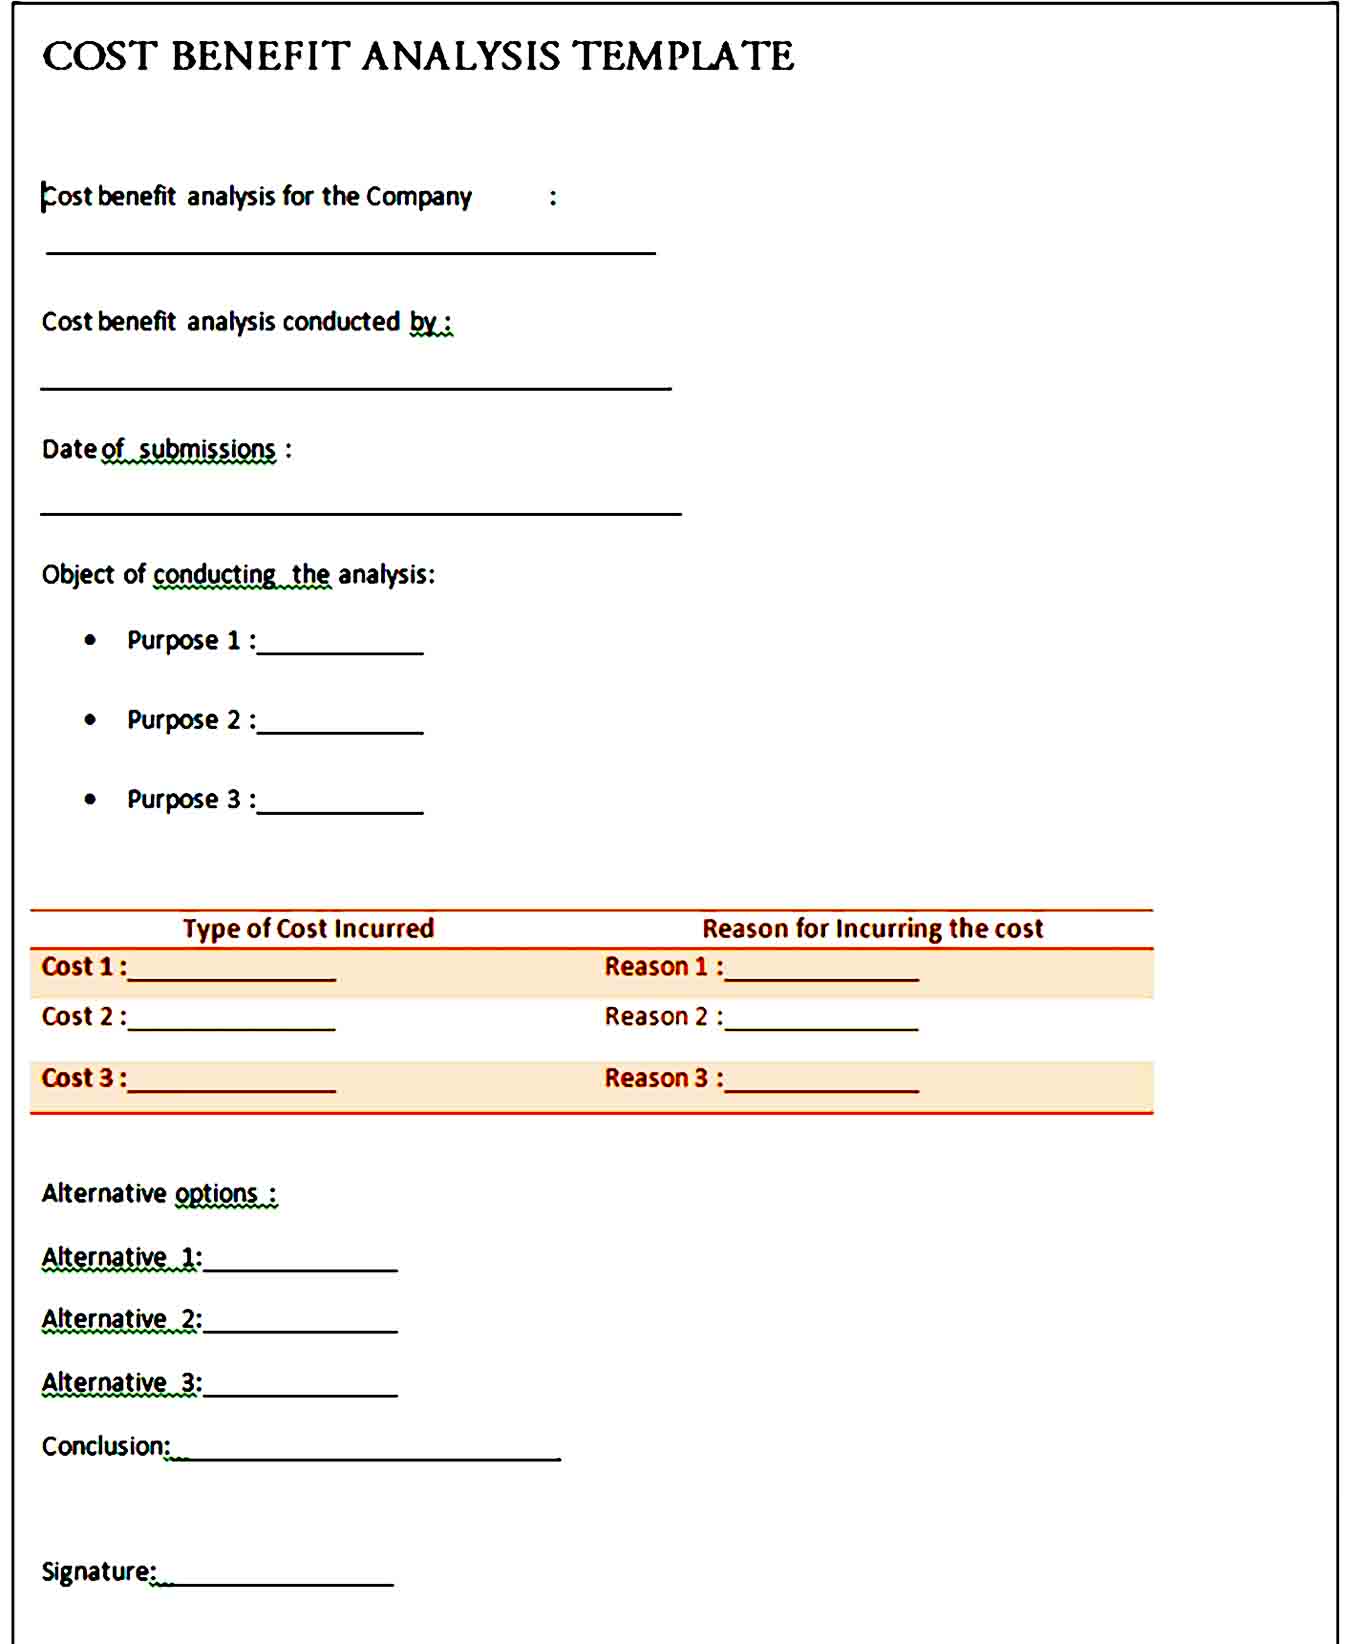 Cost Benefit Analysis Template 04